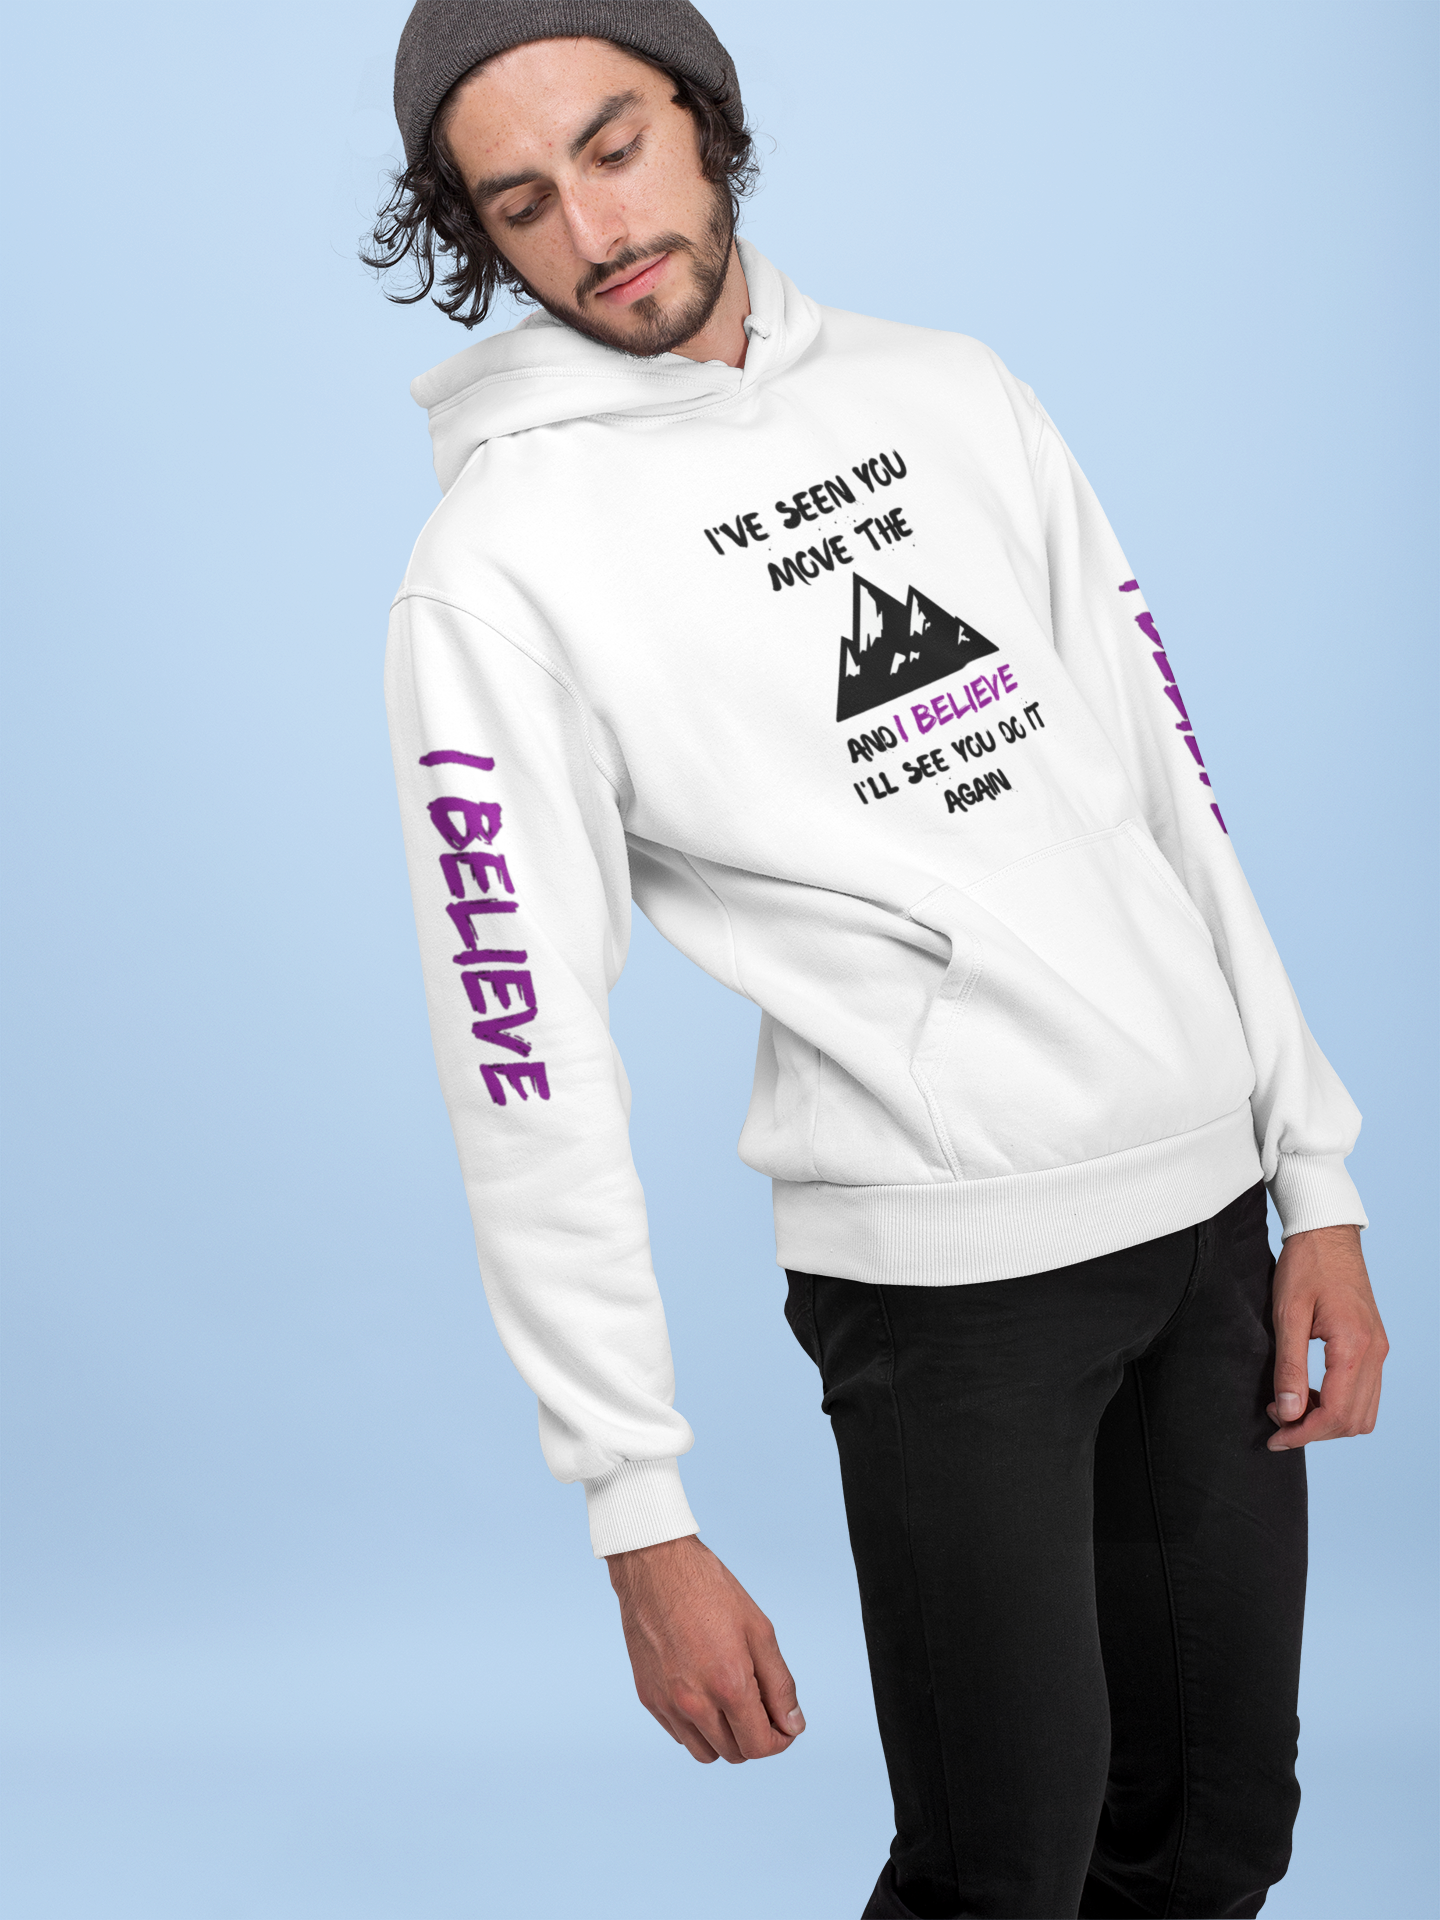 I've-Seen-You-Move-The-Mountains-and-I-Believe-Unisex-fleece-hoodie-(light-colors)